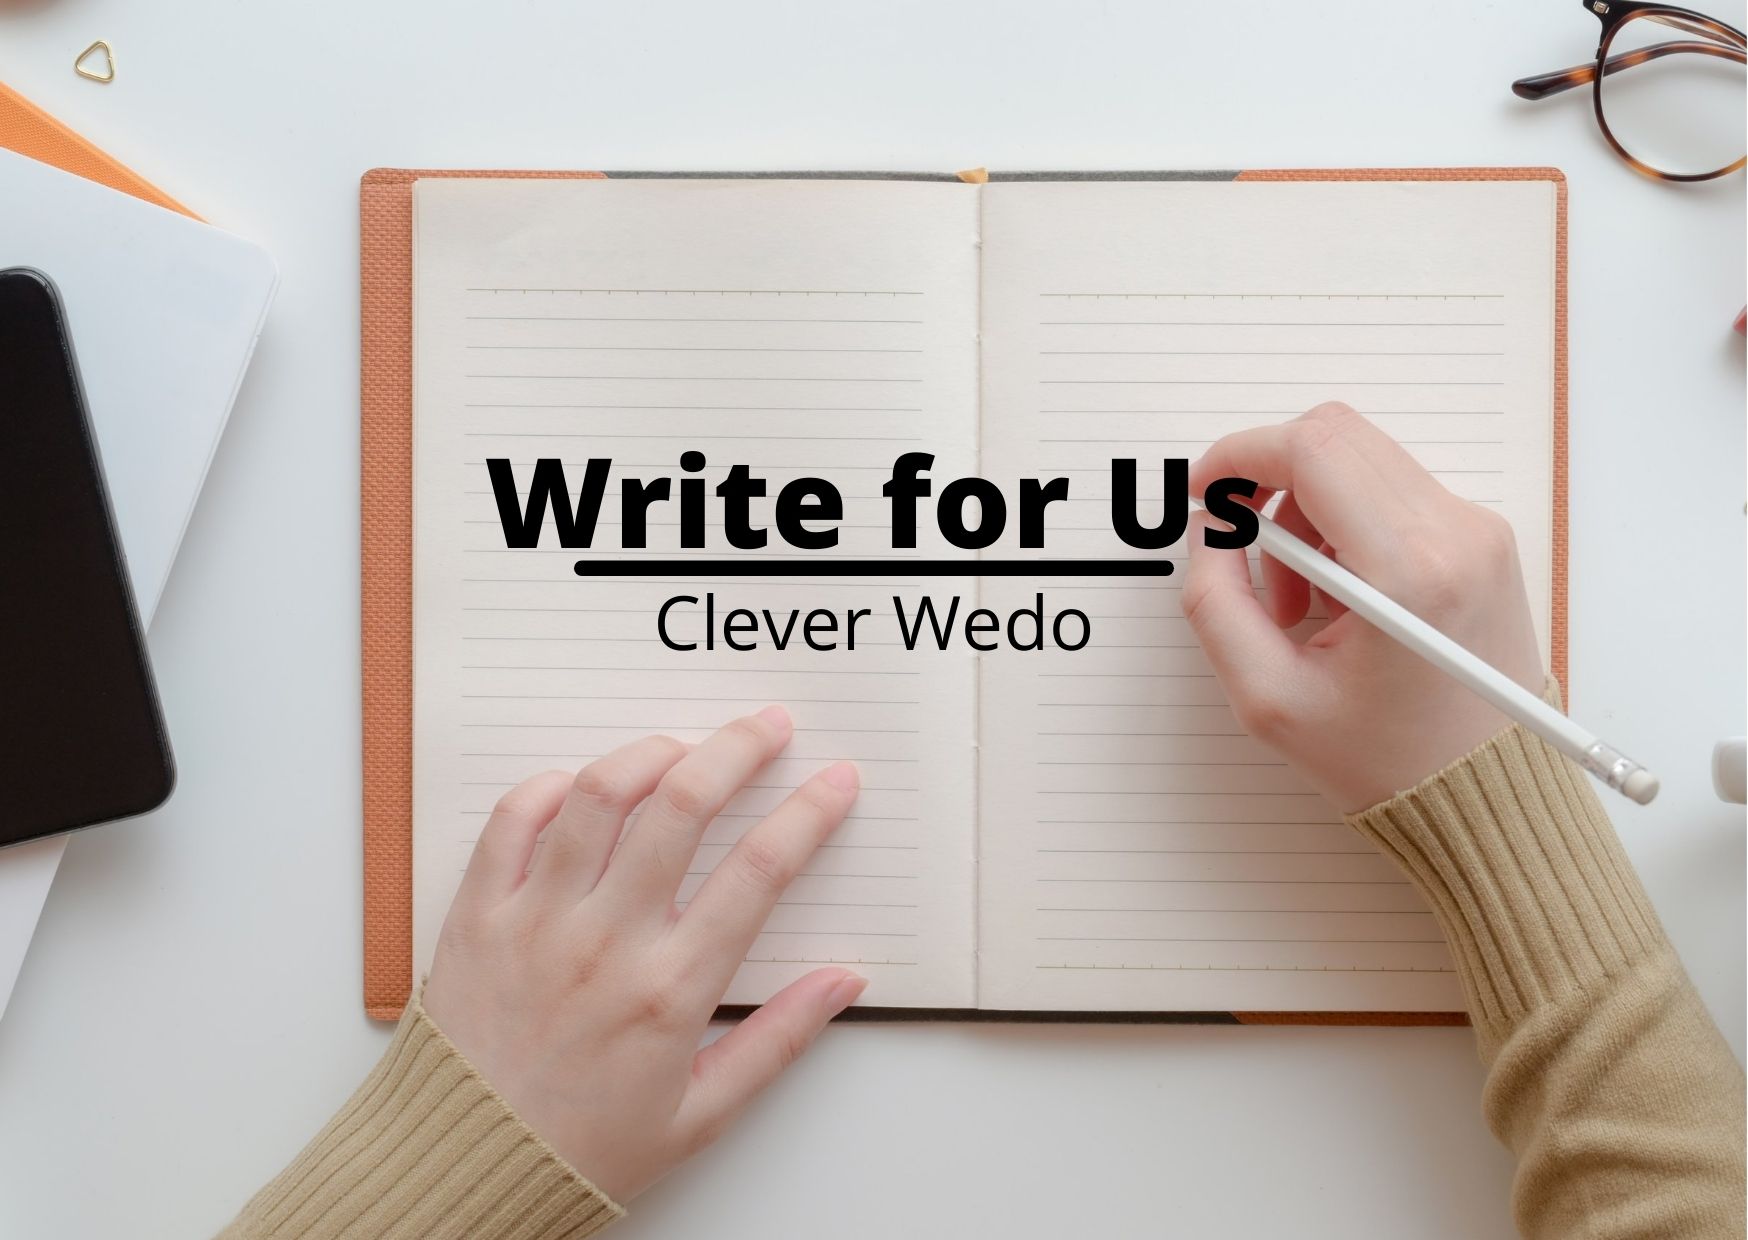 Write for Us- Clever Wedo